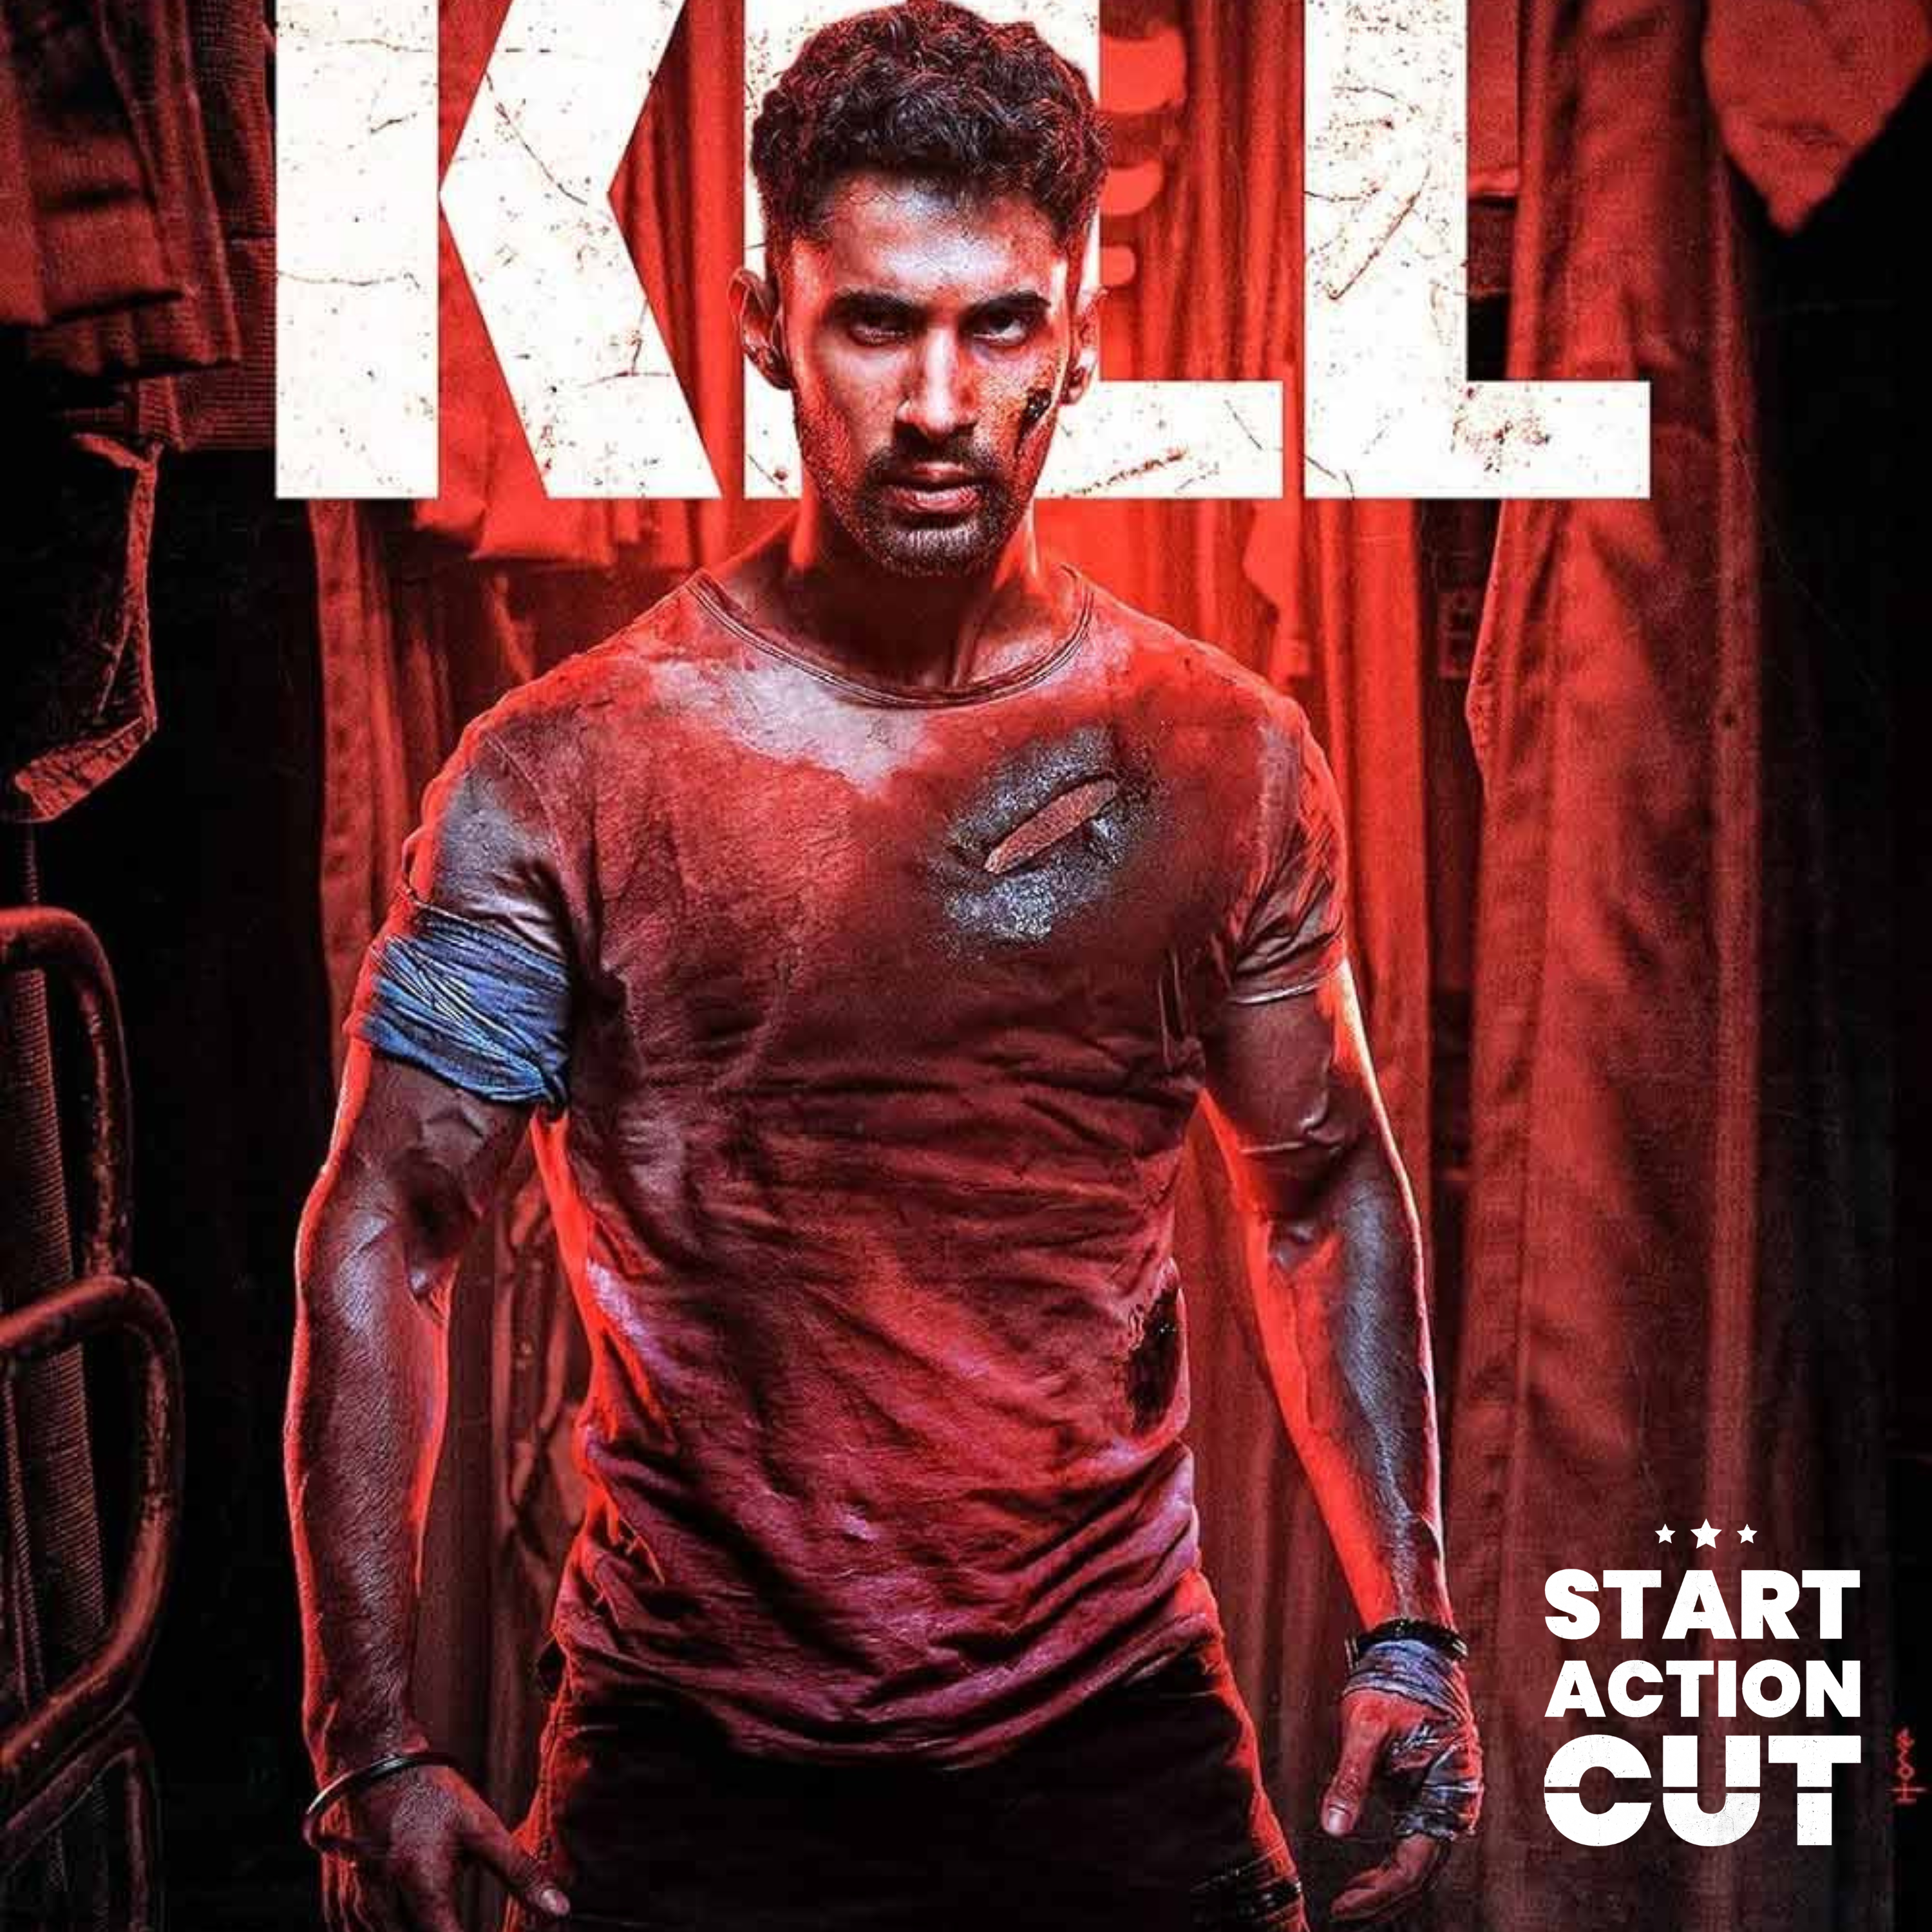 Kill: Meticulously crafted action drama that evokes non-stop thrill (2023)